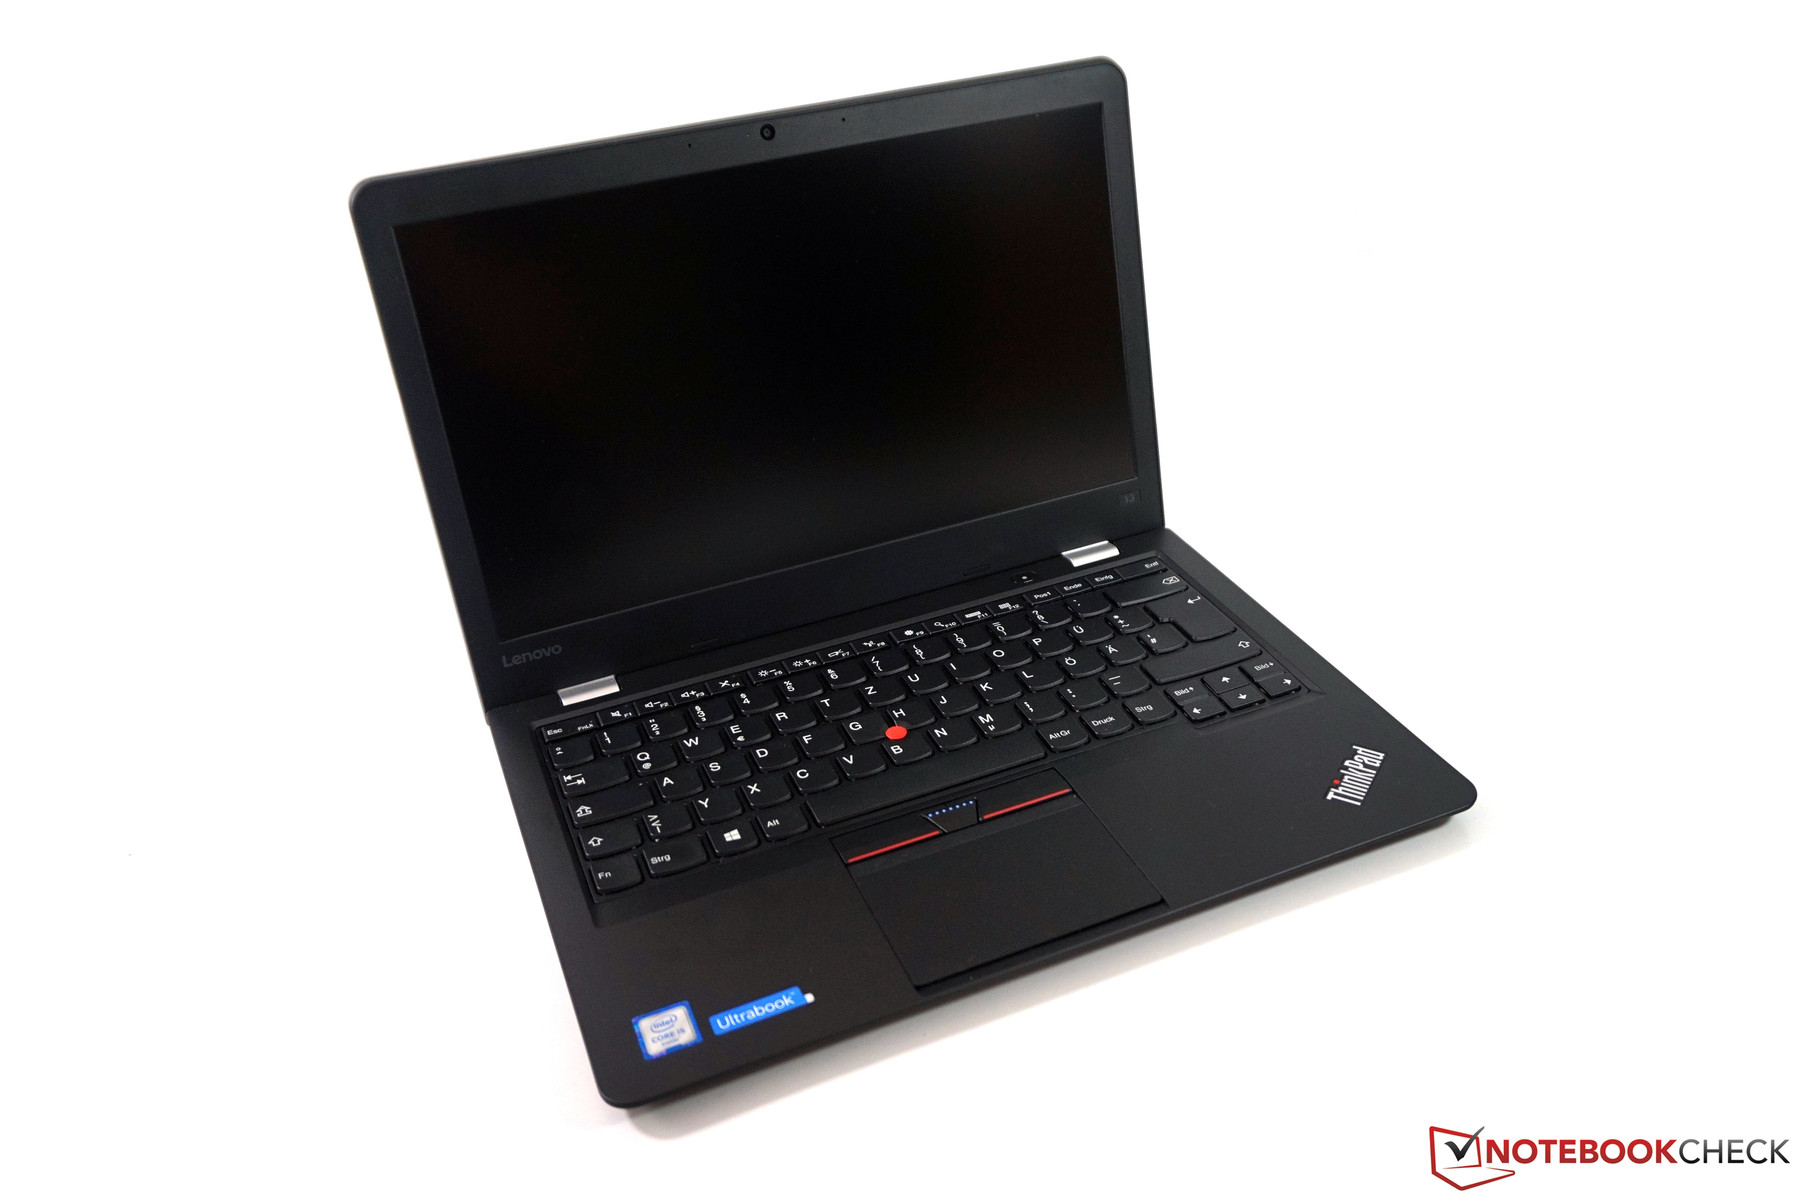 Lenovo thinkpad vs acer aspire can apple pen be used on macbook air